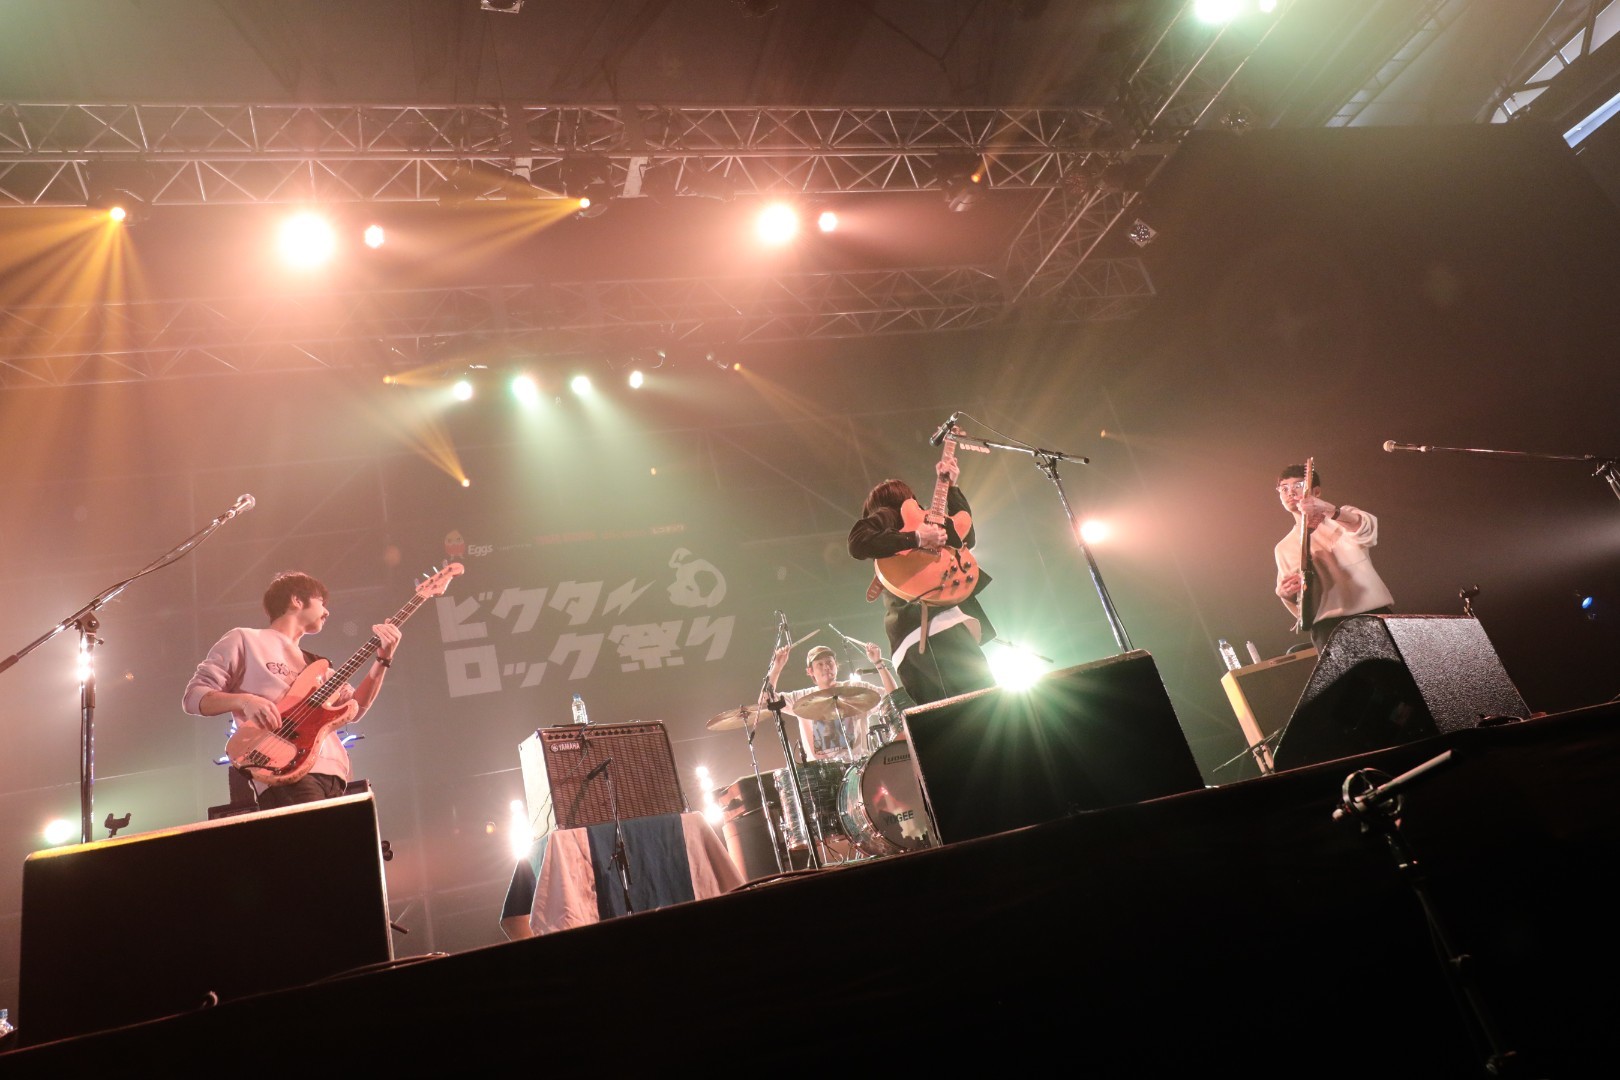 Yogee New Waves Photo by にしきゆみ（SOUND SHOOTER）